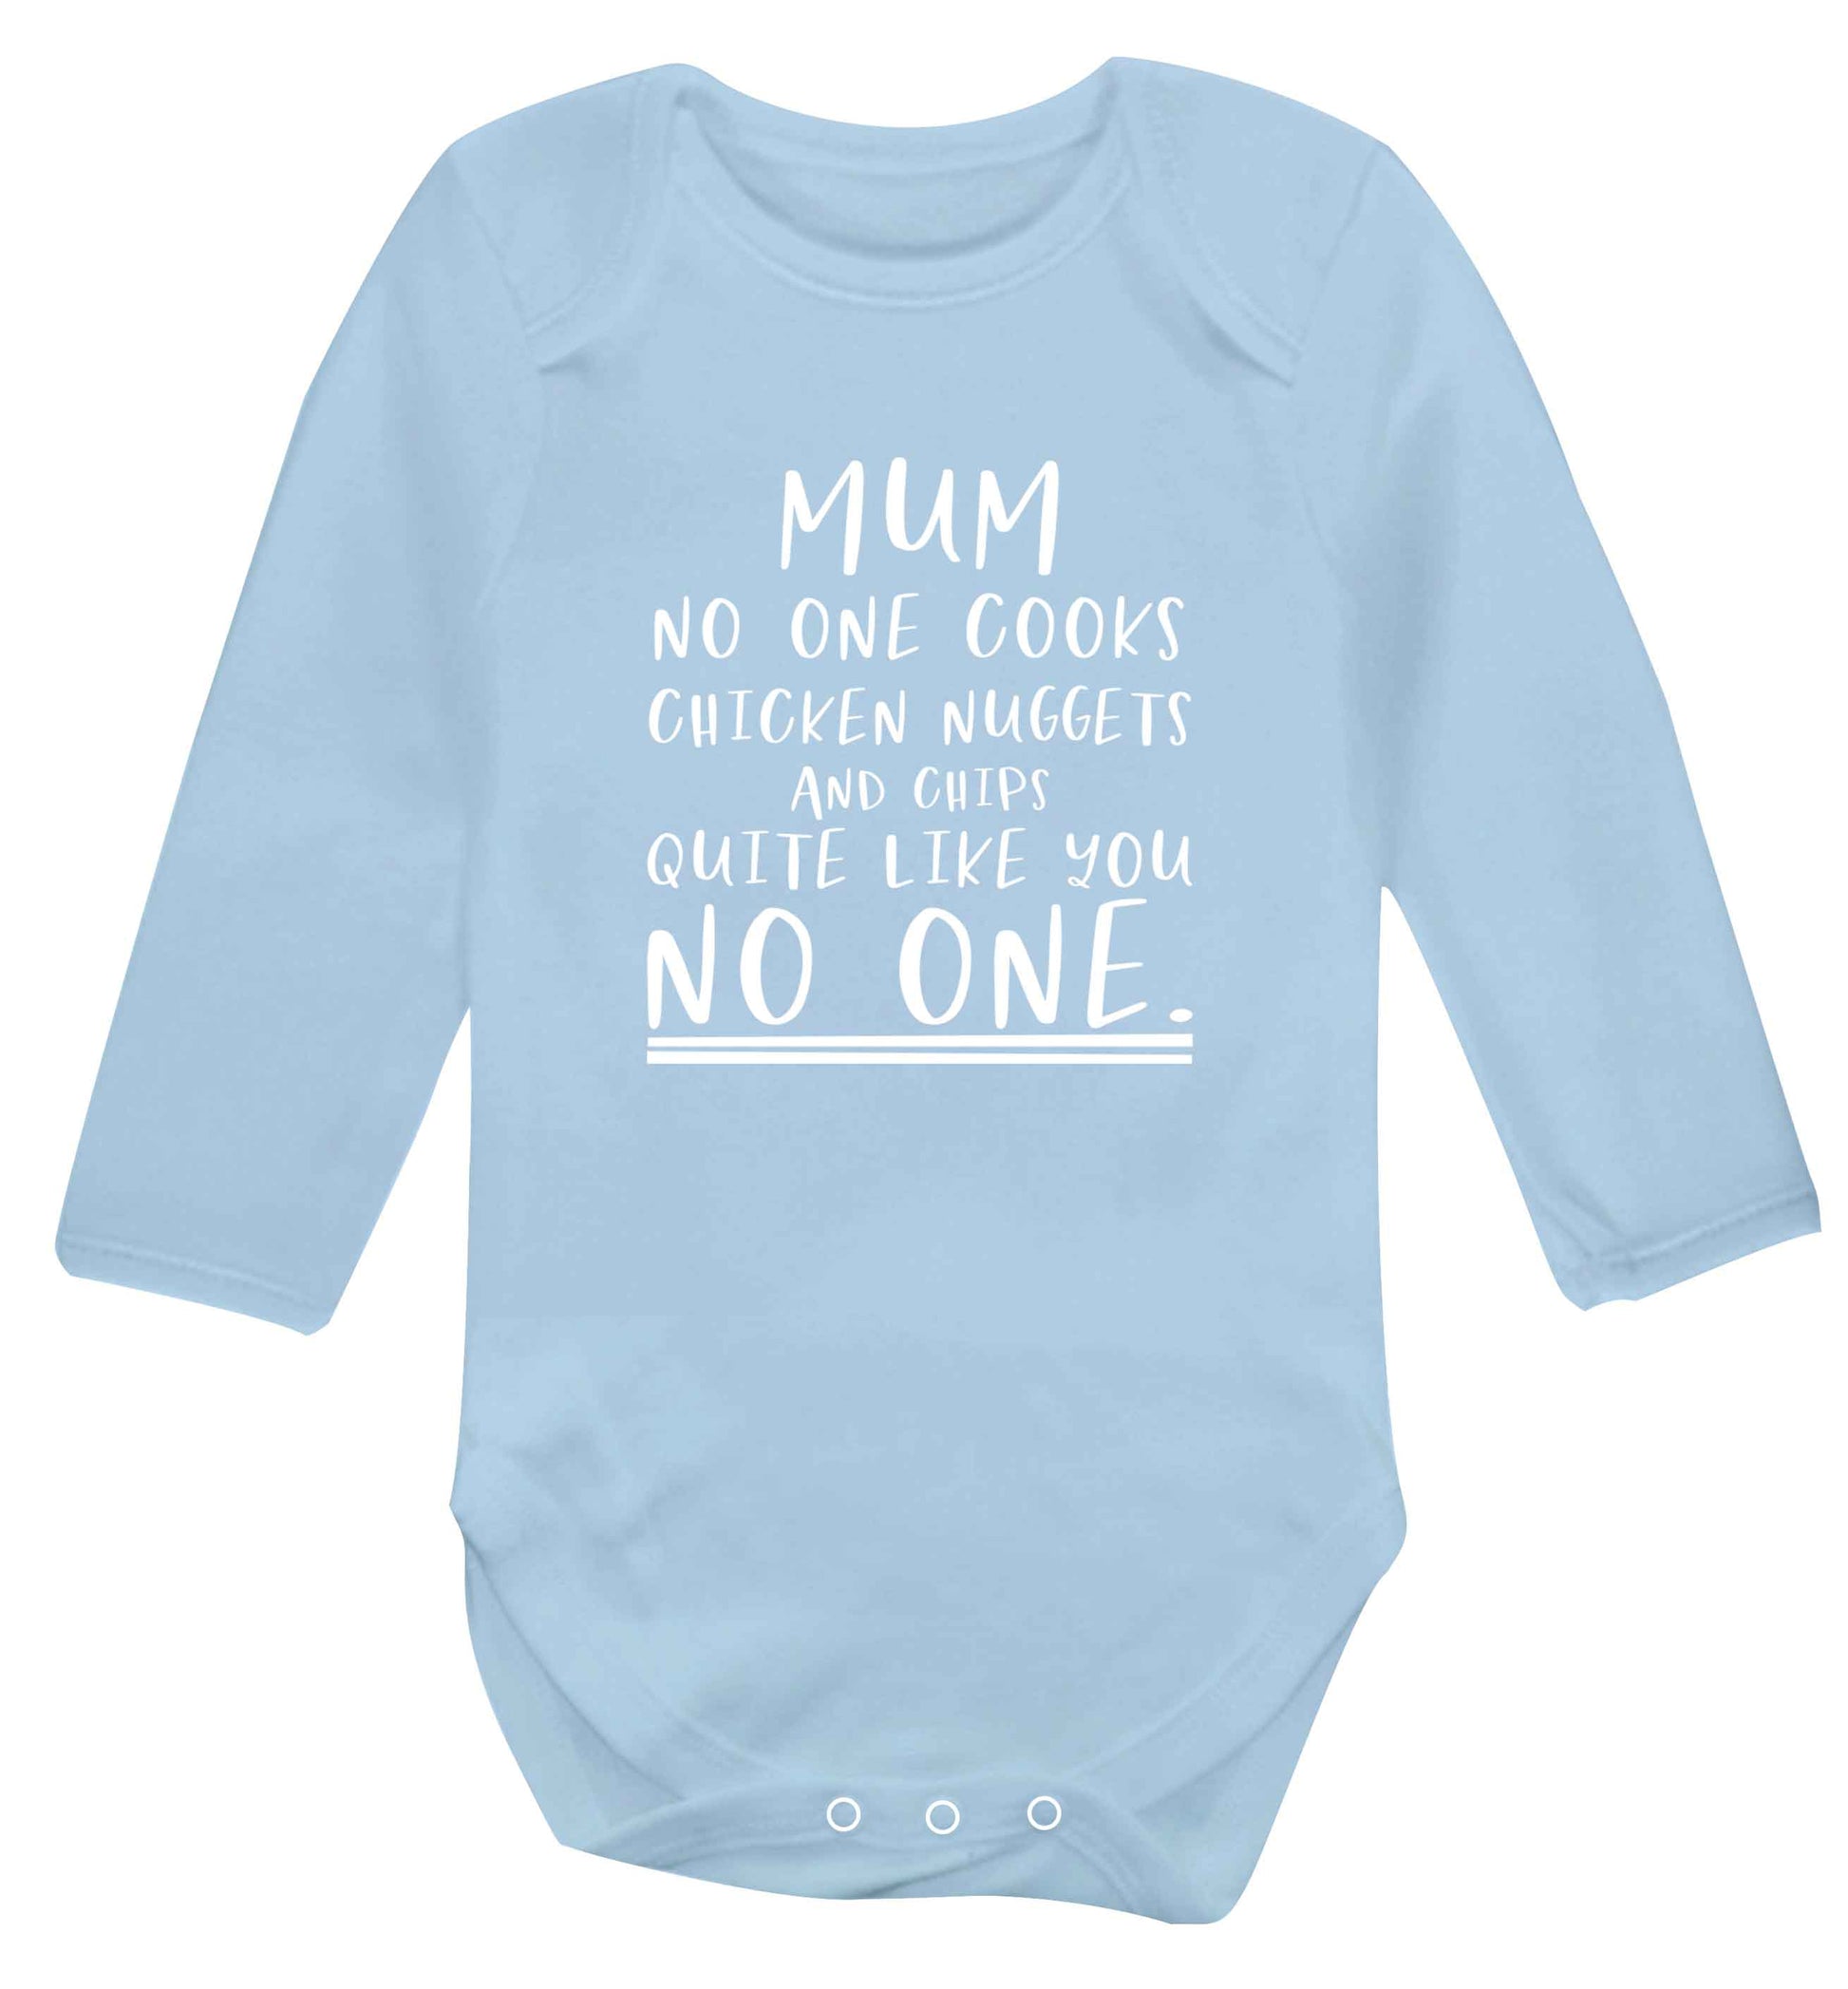 Super funny sassy gift for mother's day or birthday!  Mum no one cooks chicken nuggets and chips like you no one baby vest long sleeved pale blue 6-12 months